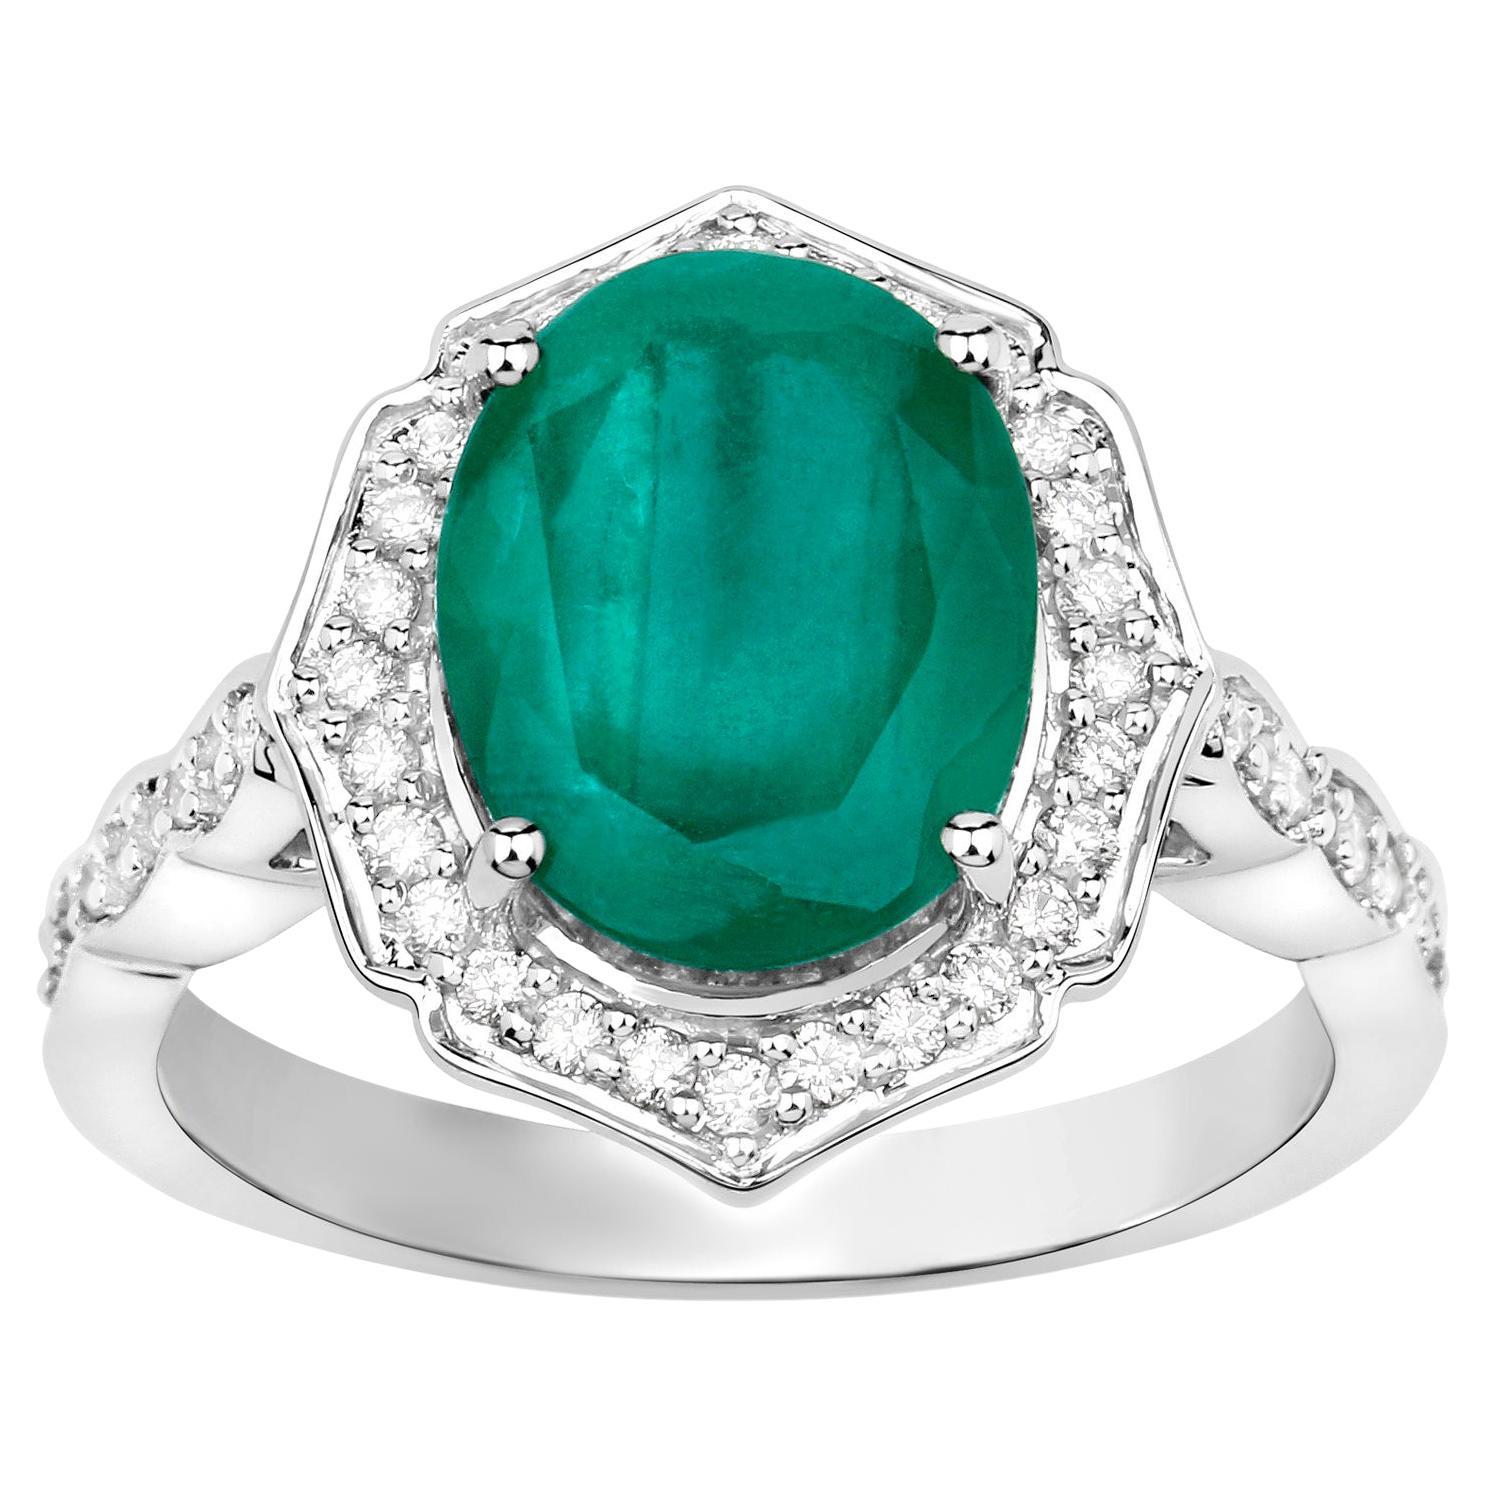 Natural Brazilian Emerald Ring Set With Diamonds 4.6 Carats 14K White Gold For Sale